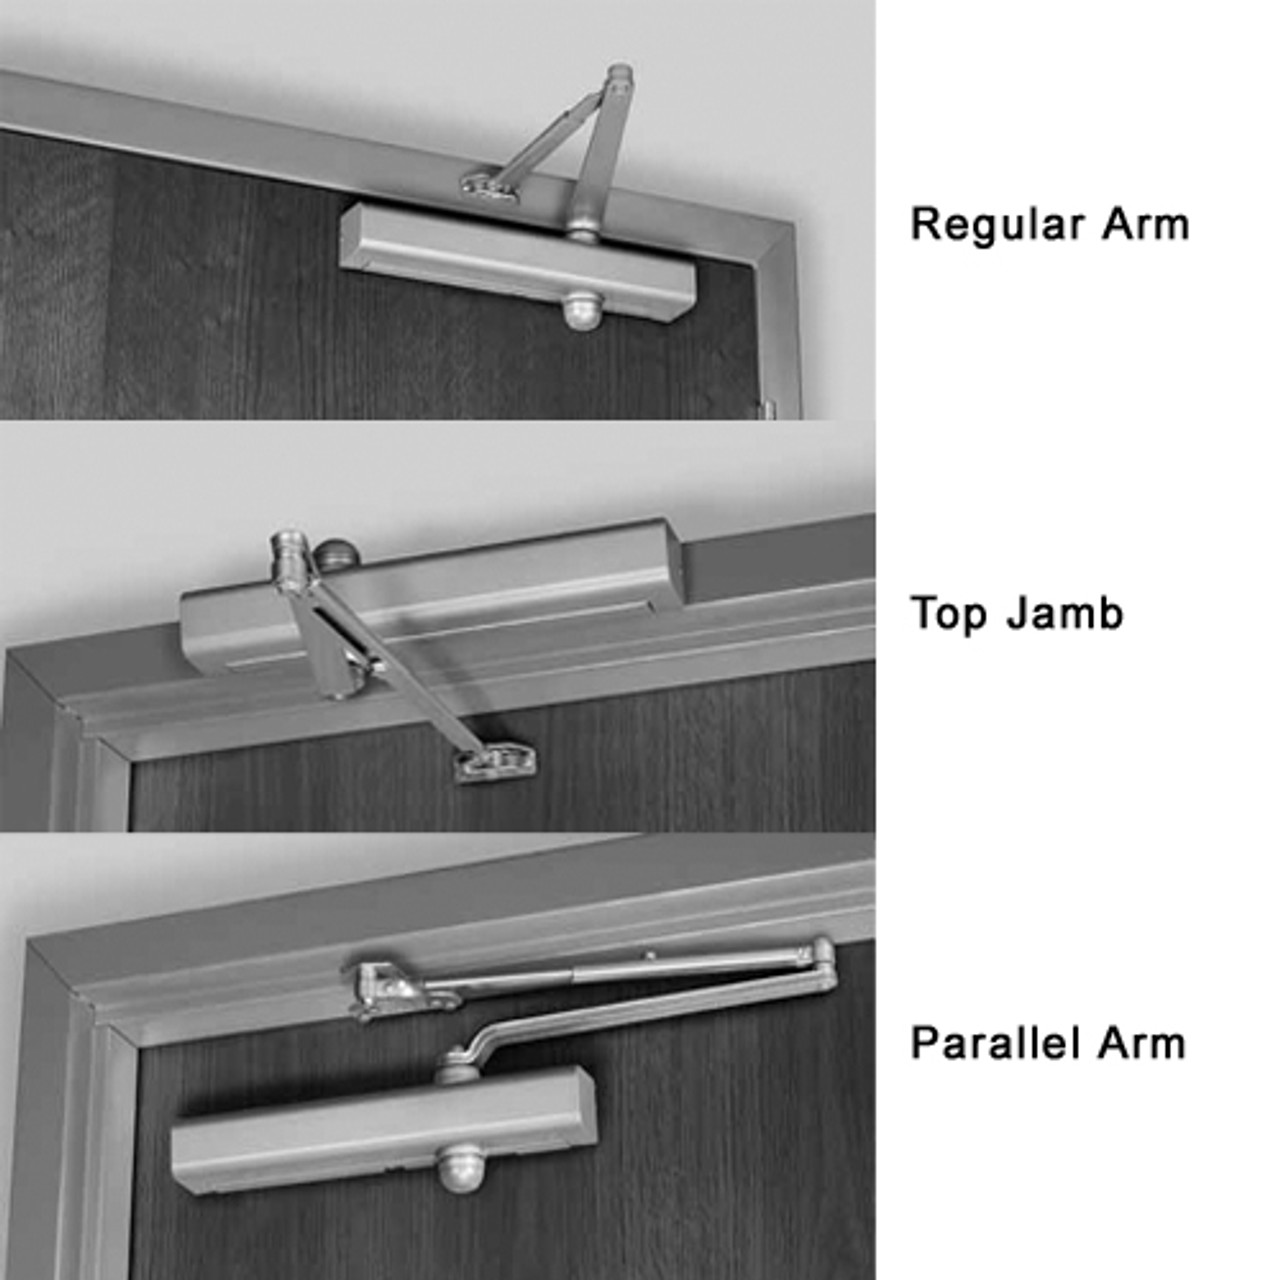 8501HM-691 Norton 8000 Series Full Cover Hold Open Door Closers with Regular Parallel and Top Jamb to 2-3/4 inch Reveal in Dull Bronze Finish